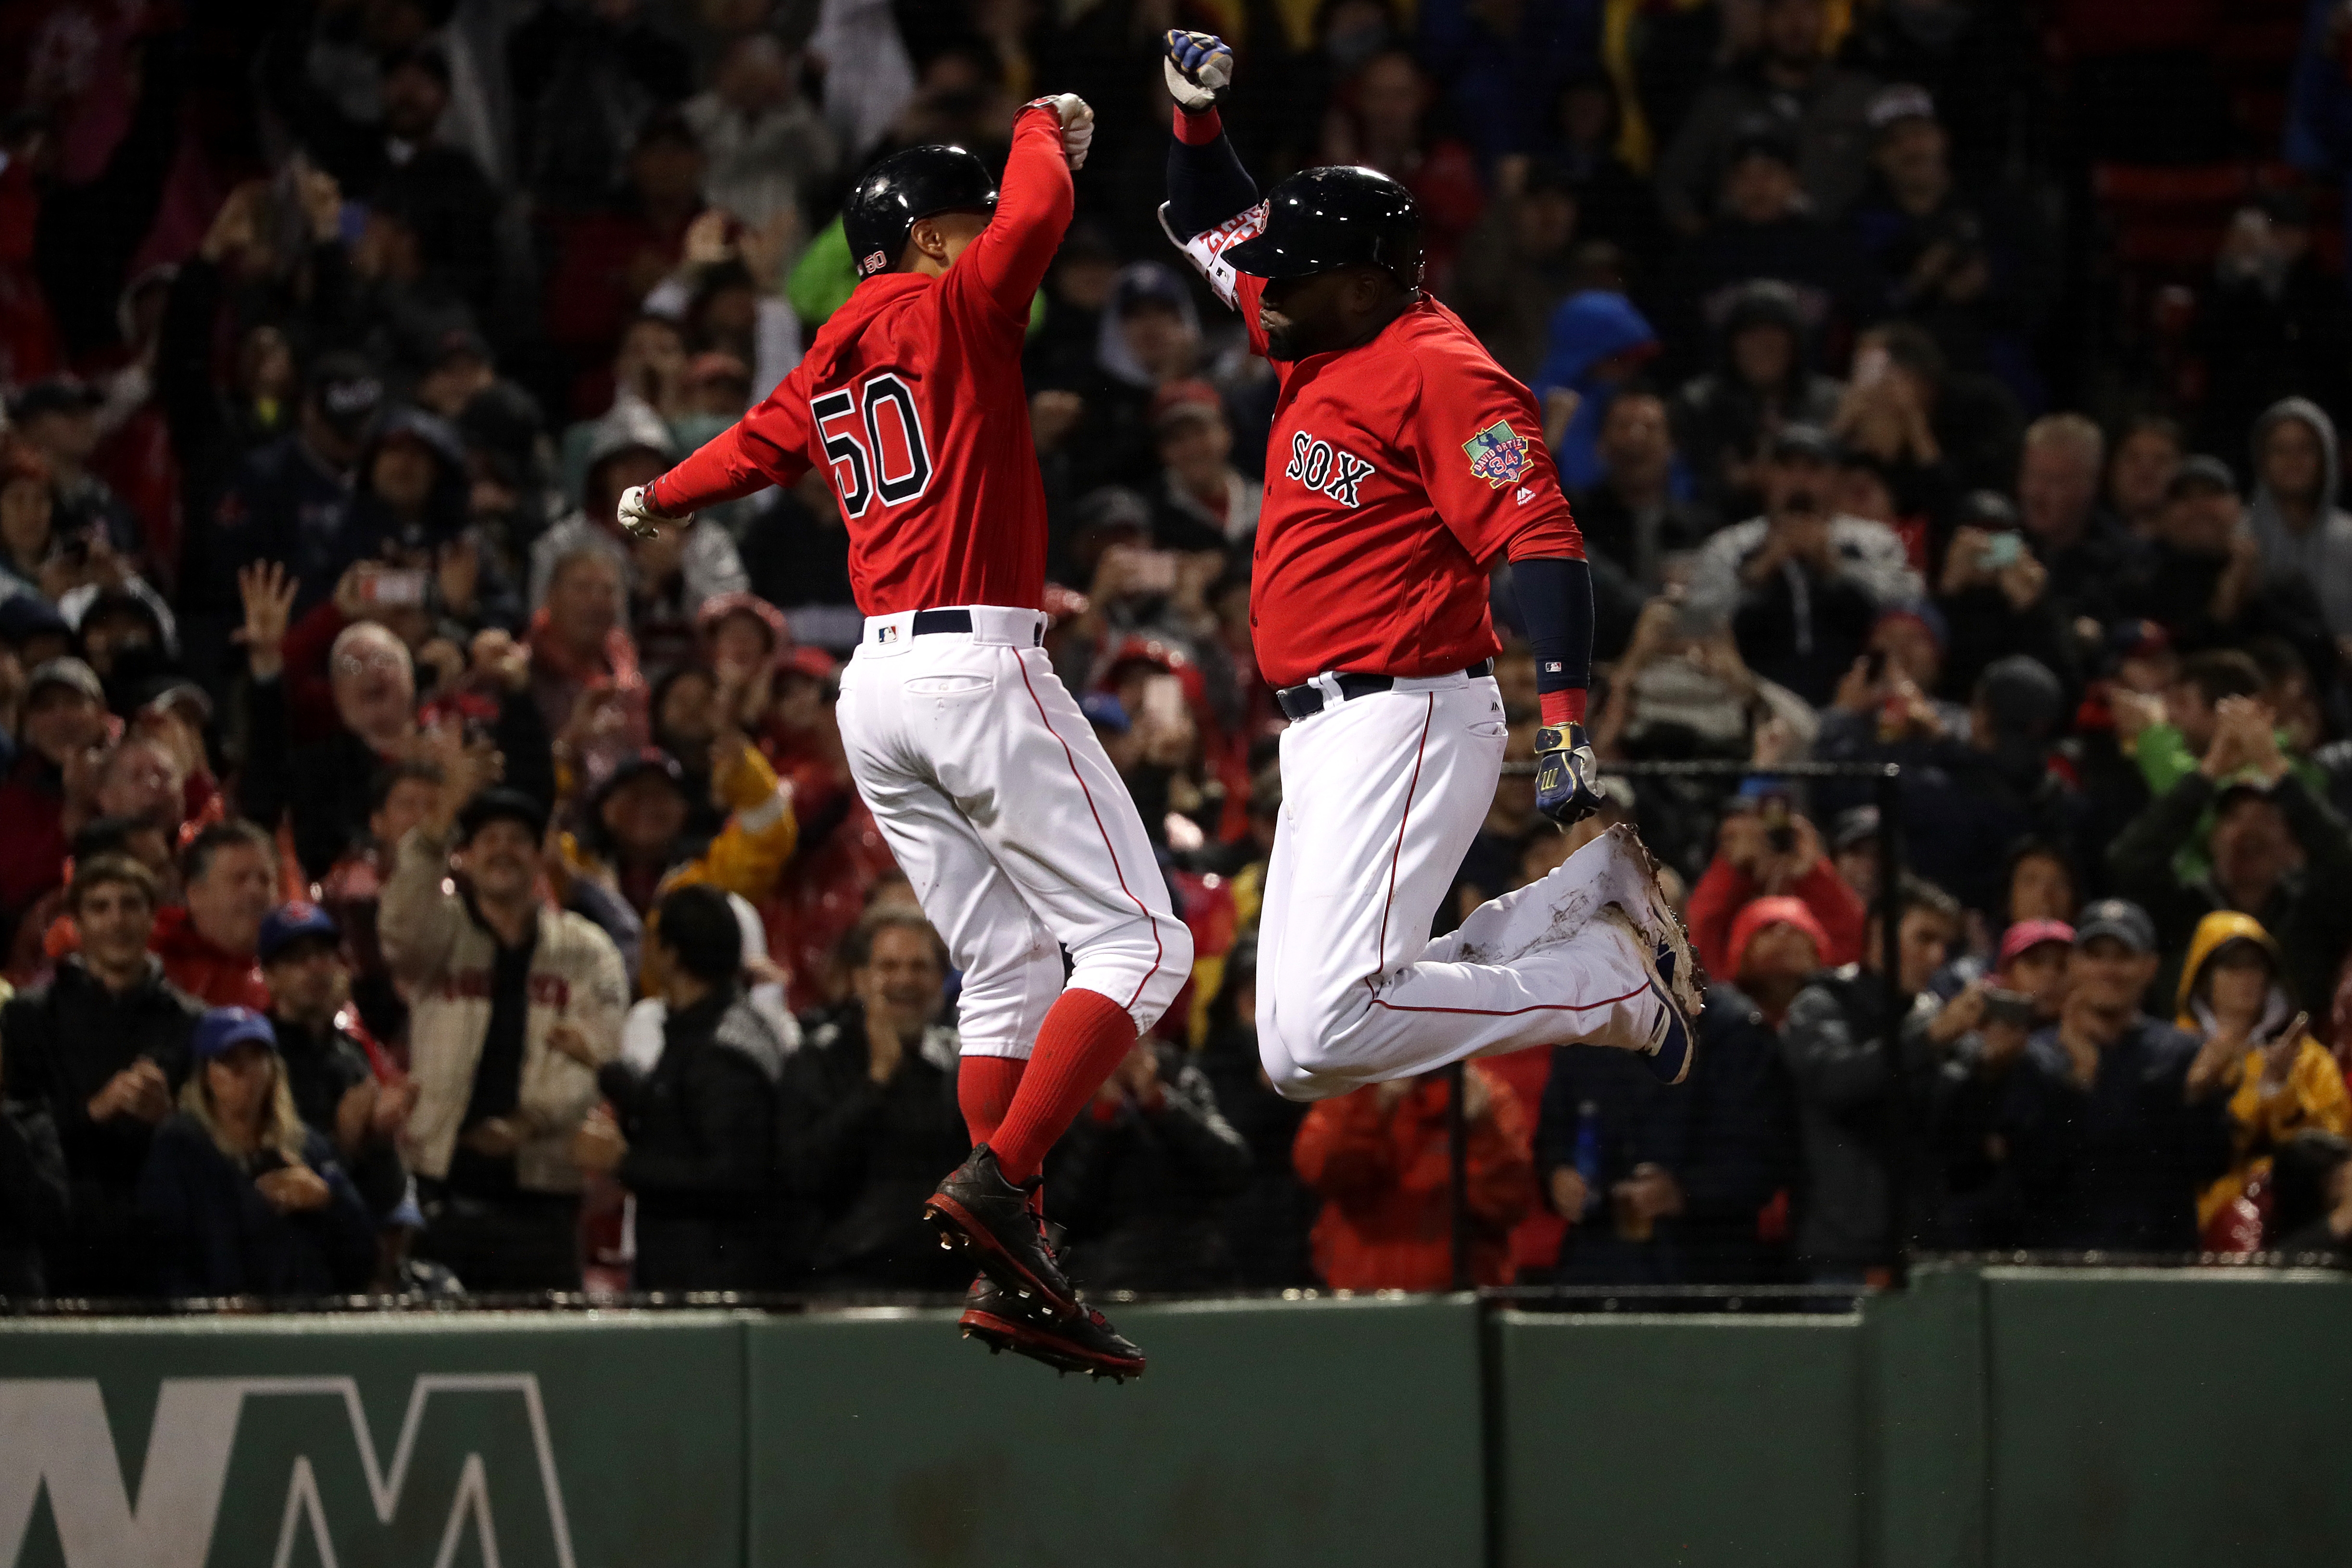 VIDEO: Dramatic Home Run by David Ortiz May Have Saved the Red Sox's Season